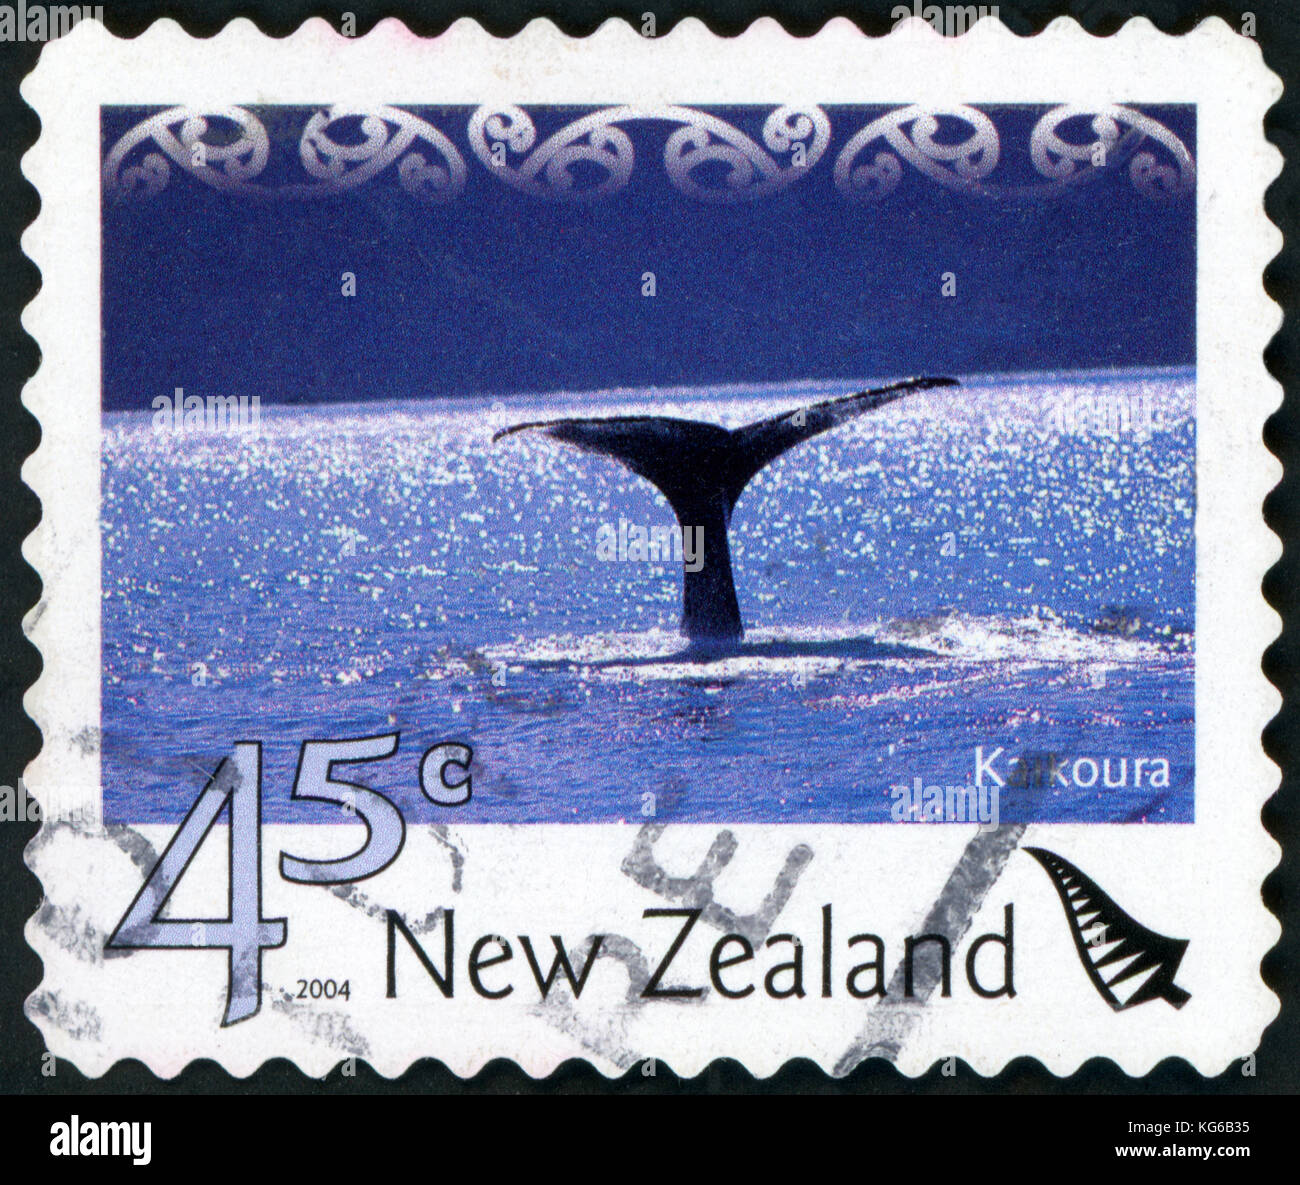 NEW ZEALAND - CIRCA 2004: a stamp from New Zealand shows image of a whale's tail, circa 2004 Stock Photo